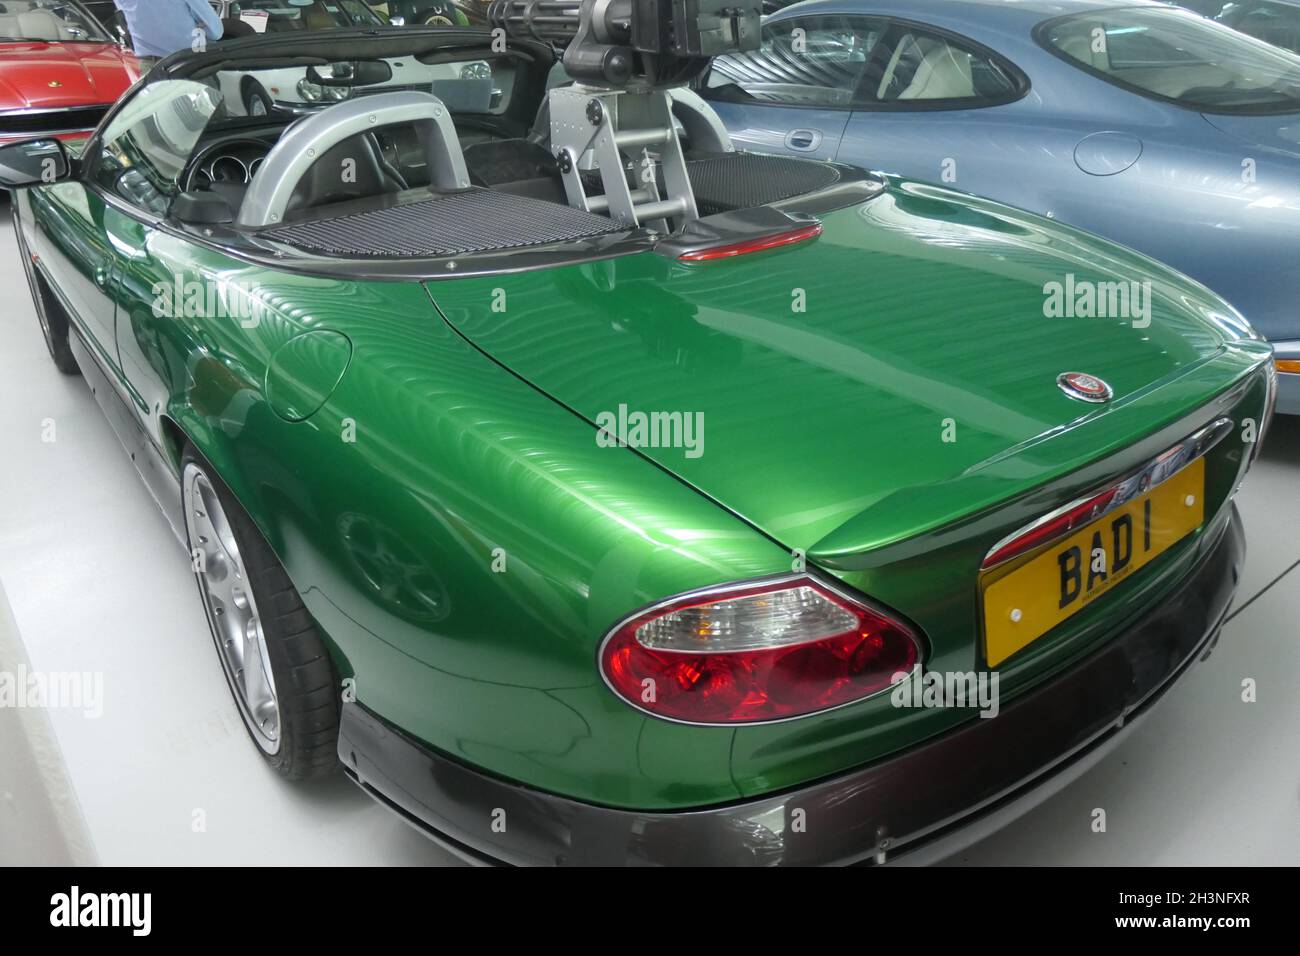 Jaguar XKR used in James Bond film Die another day Stock Photo - Alamy